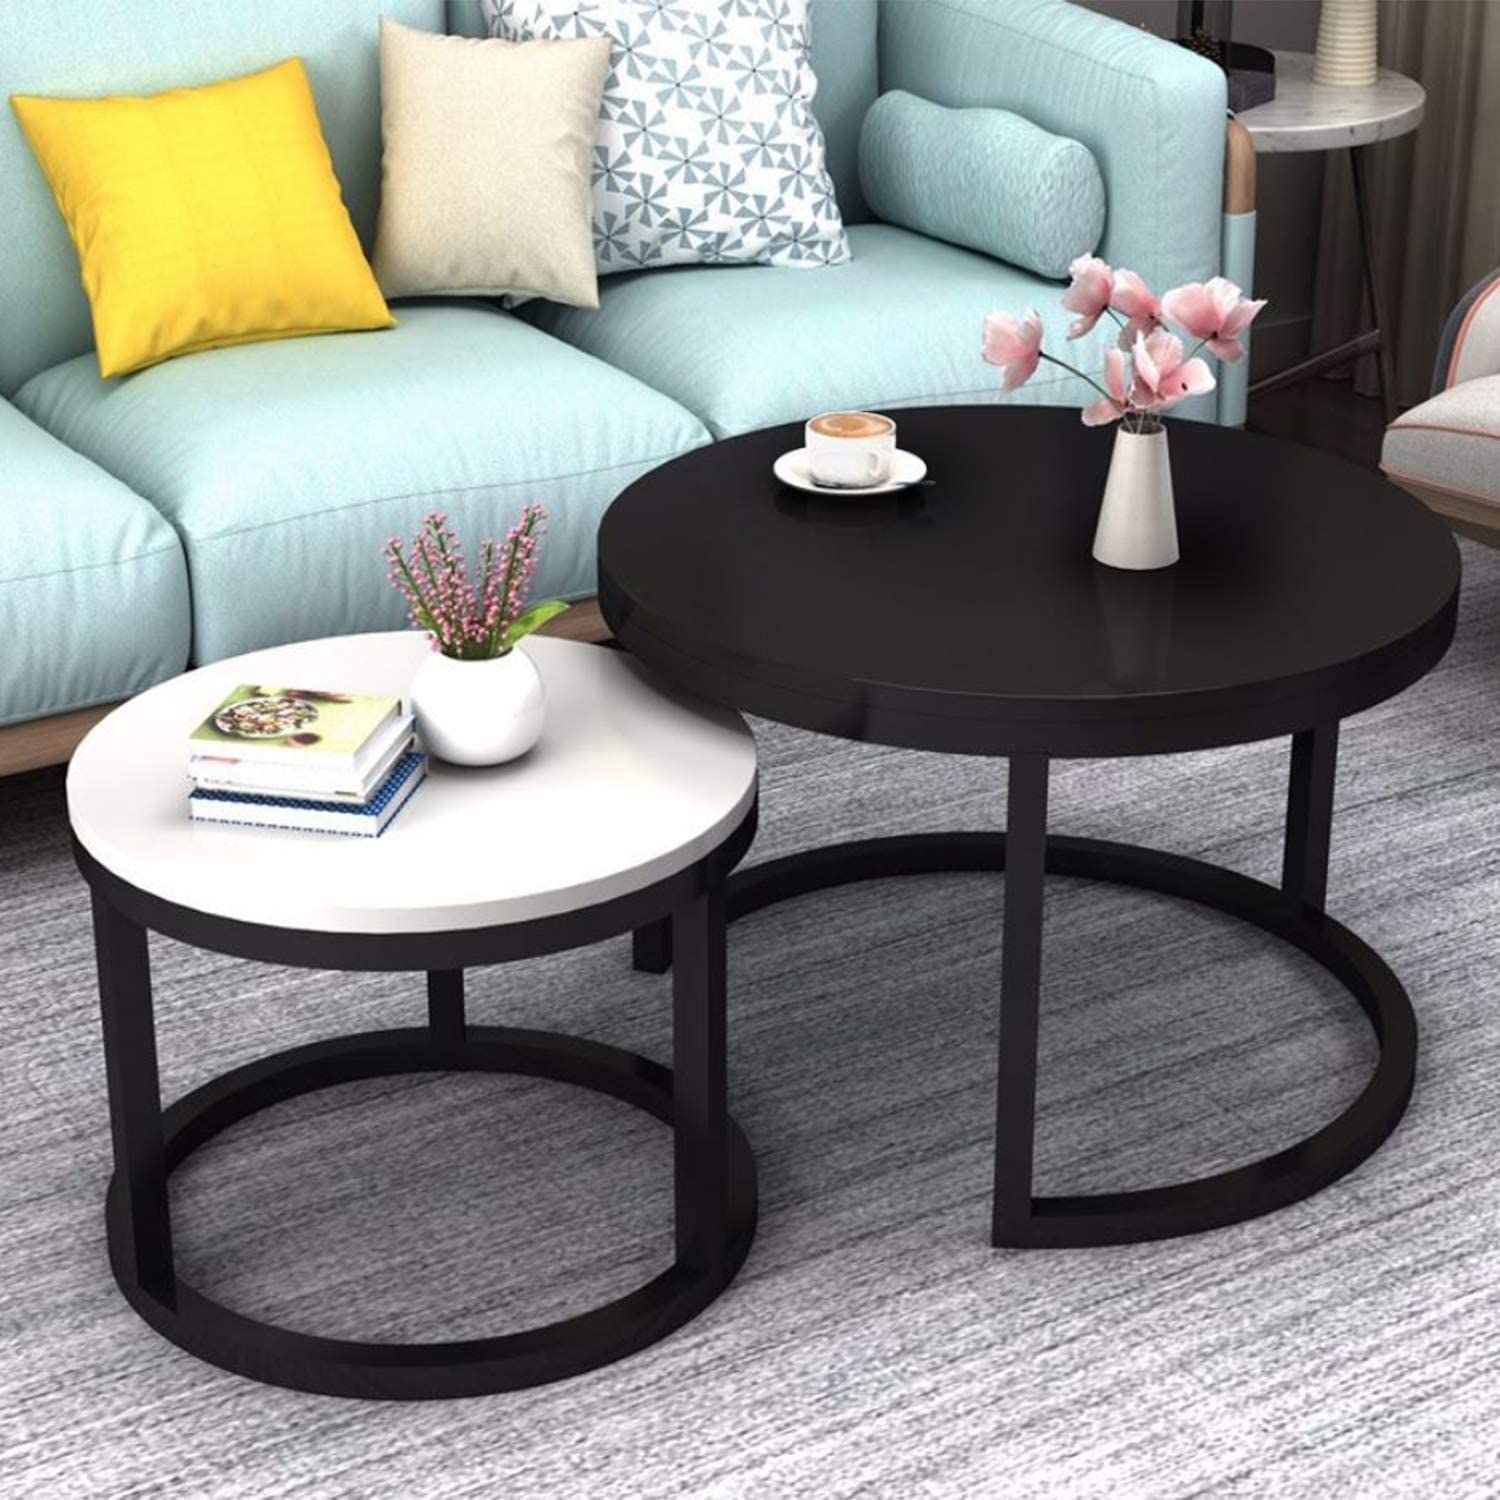 2 Round Tea Table Coffee Table Desk Sets | Black & White For Gray Wood Black Steel Coffee Tables (View 2 of 15)